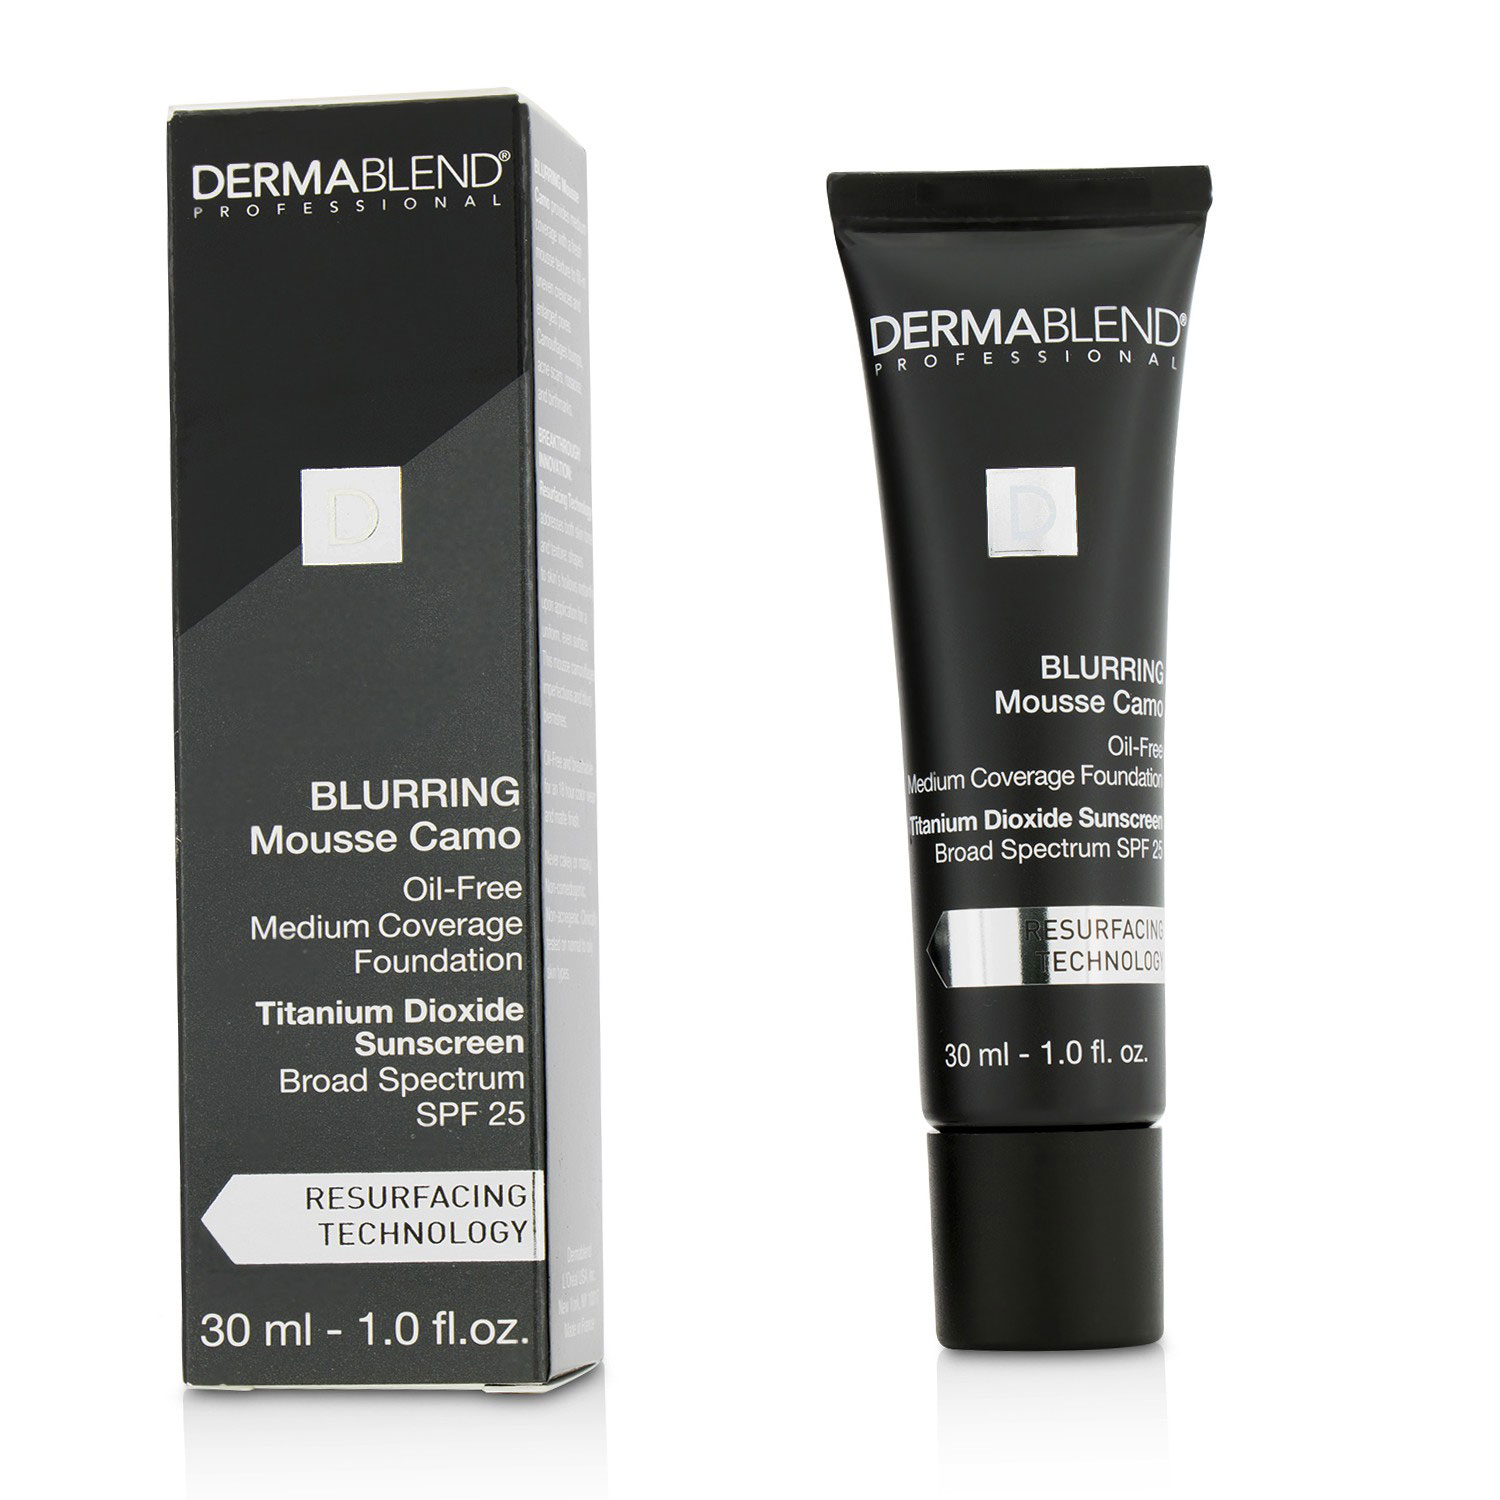 Blurring Mousee Camo Oil Free Foundation SPF 25 (Medium Coverage) - #60W Spice Dermablend Image